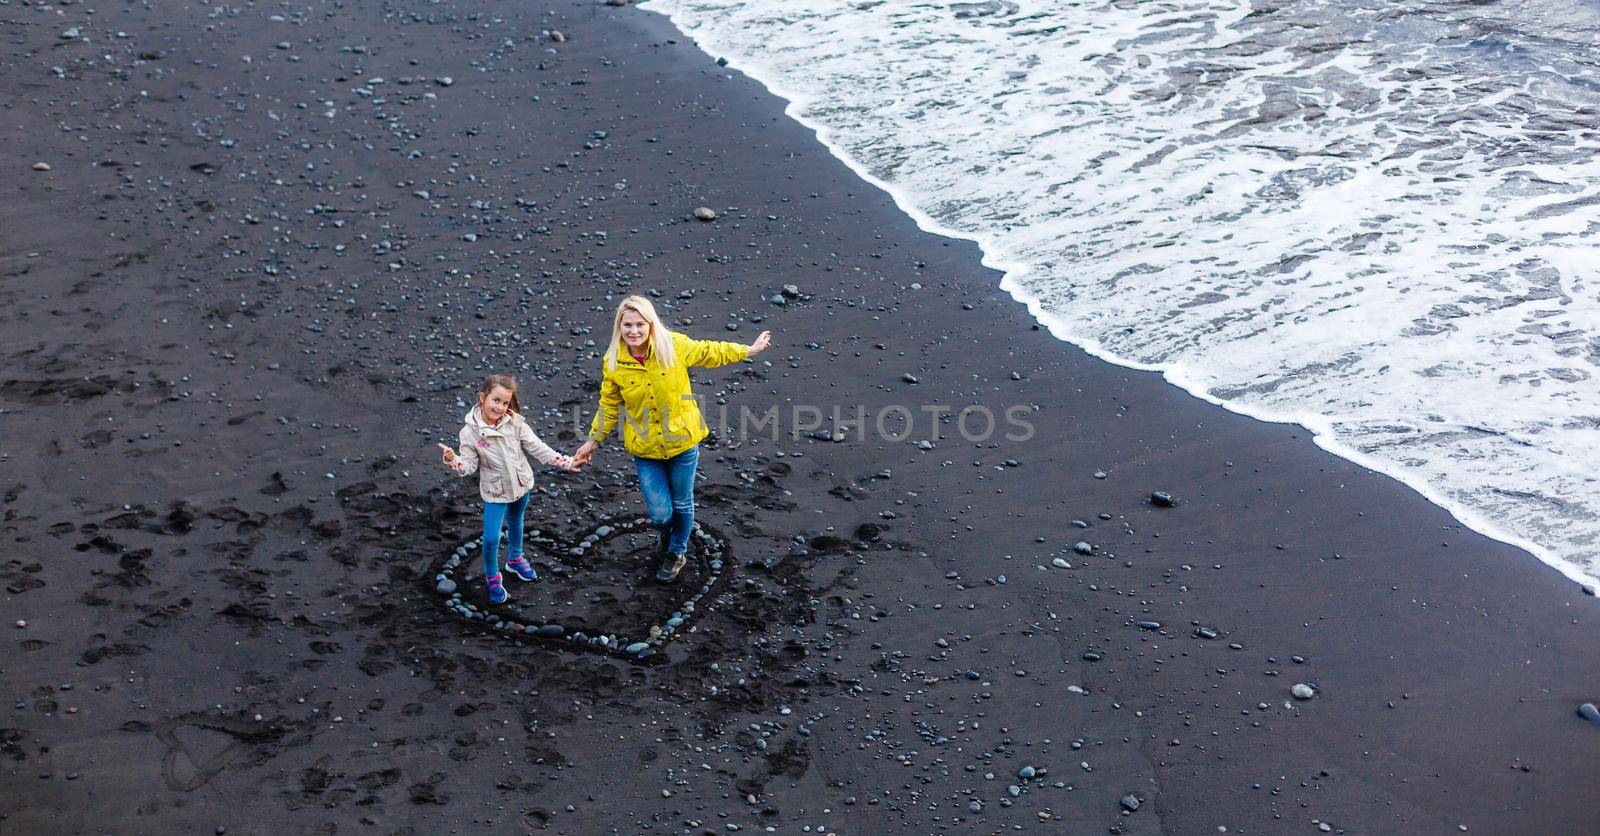 Family holiday on Tenerife, Spain, Europe. Mother and daughter outdoors on ocean. Portrait travel tourists - mom with child. Positive human emotions, active lifestyles. Happy young family on sea beach by Andelov13